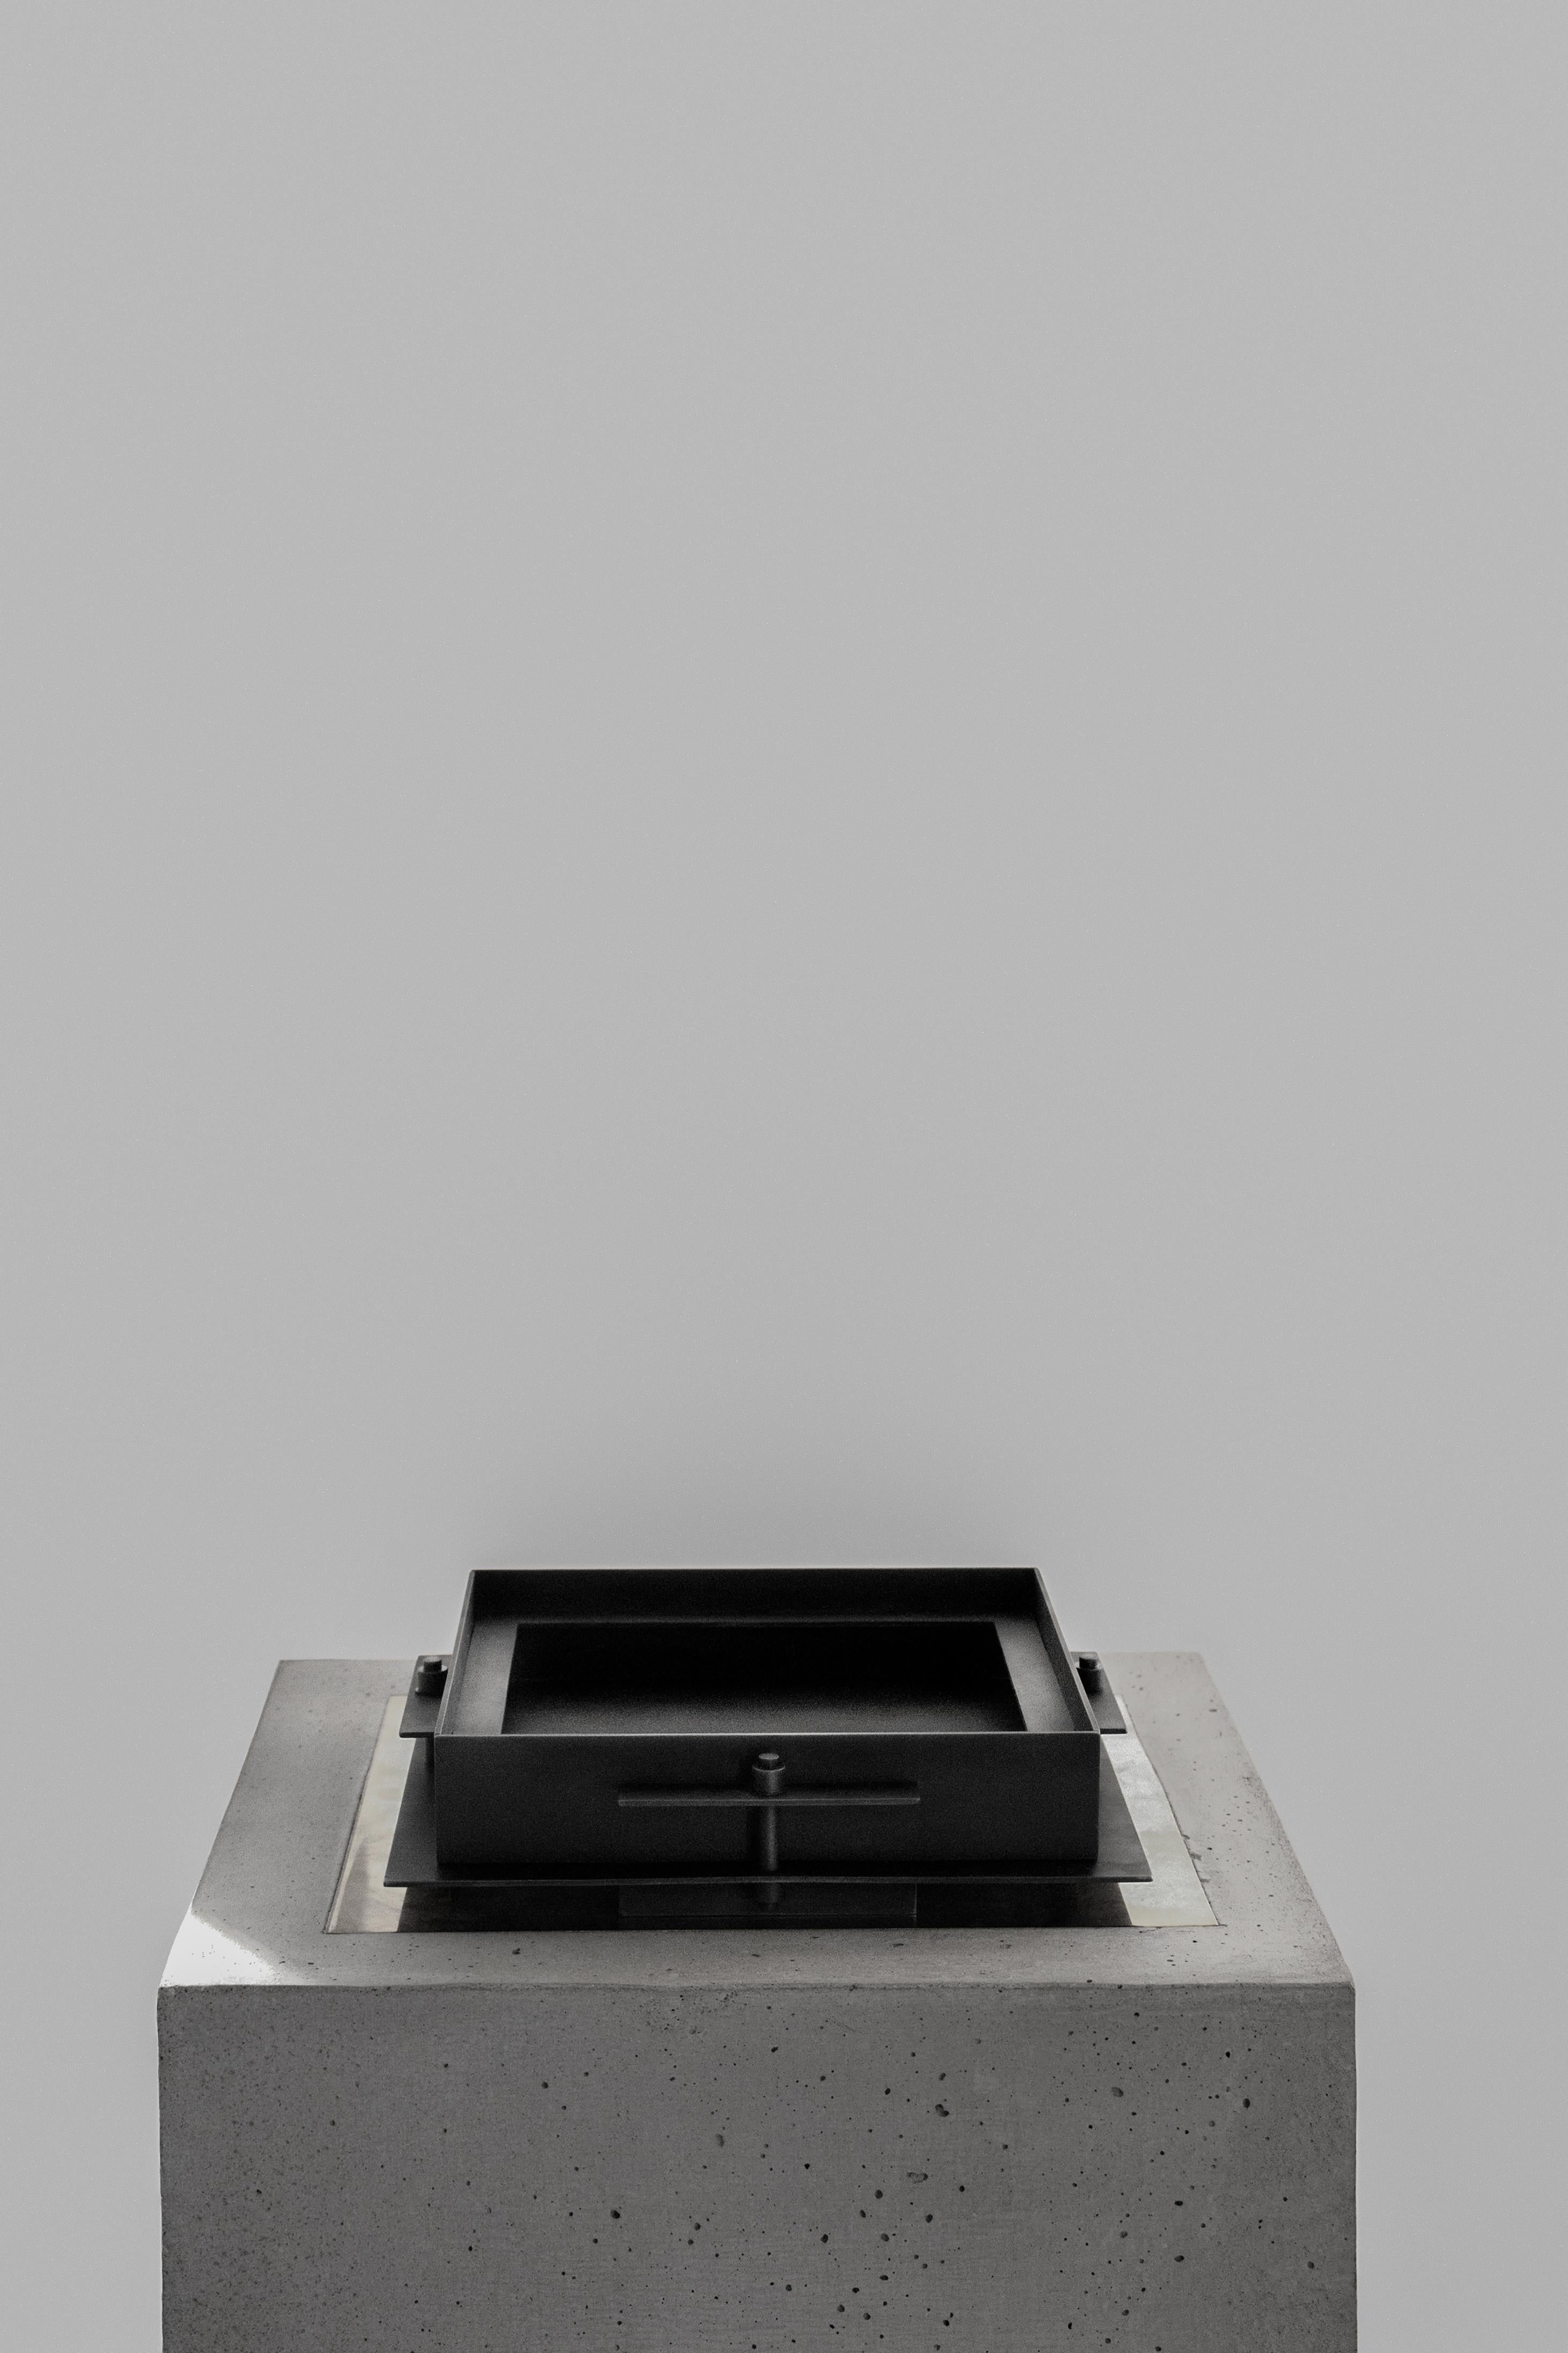 Pilier small tray by Sizar Alexis
Unique Signed Piece
Dimensions: Length 23 x width 23 x height 6 cm
Materials: Blackened steel, ox leather 

A series of boldly sculpted furnitures and objects, an
appreciation of the raw metal feel and